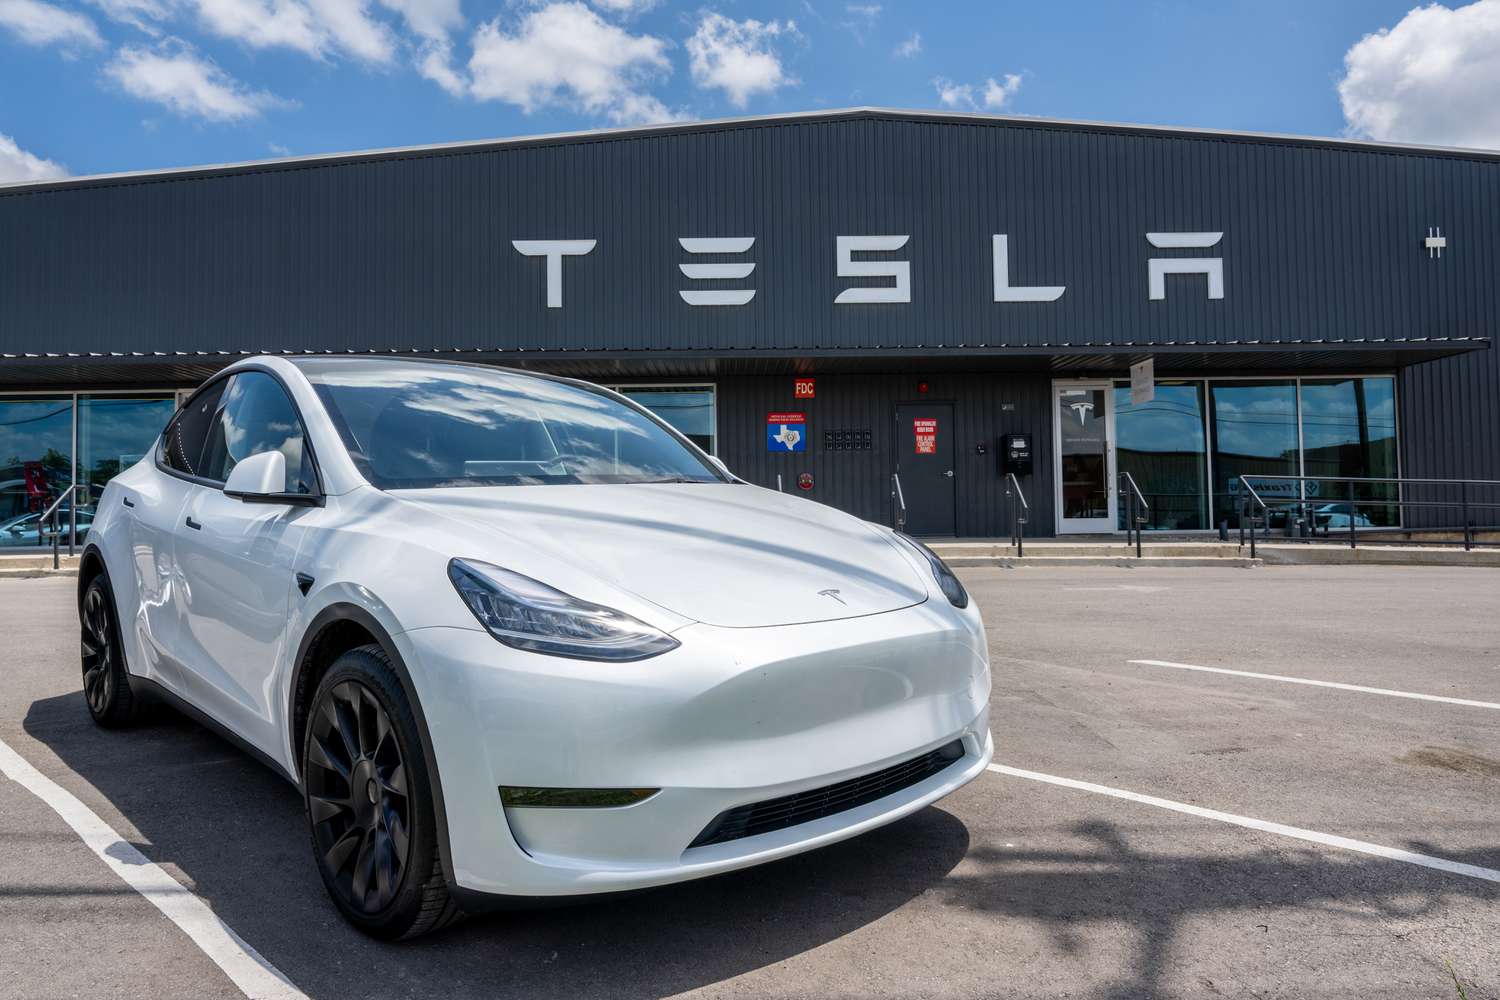 Tesla Faces Mounting Pressures: Plummeting Sales in Europe and China Shake Investor Confidence